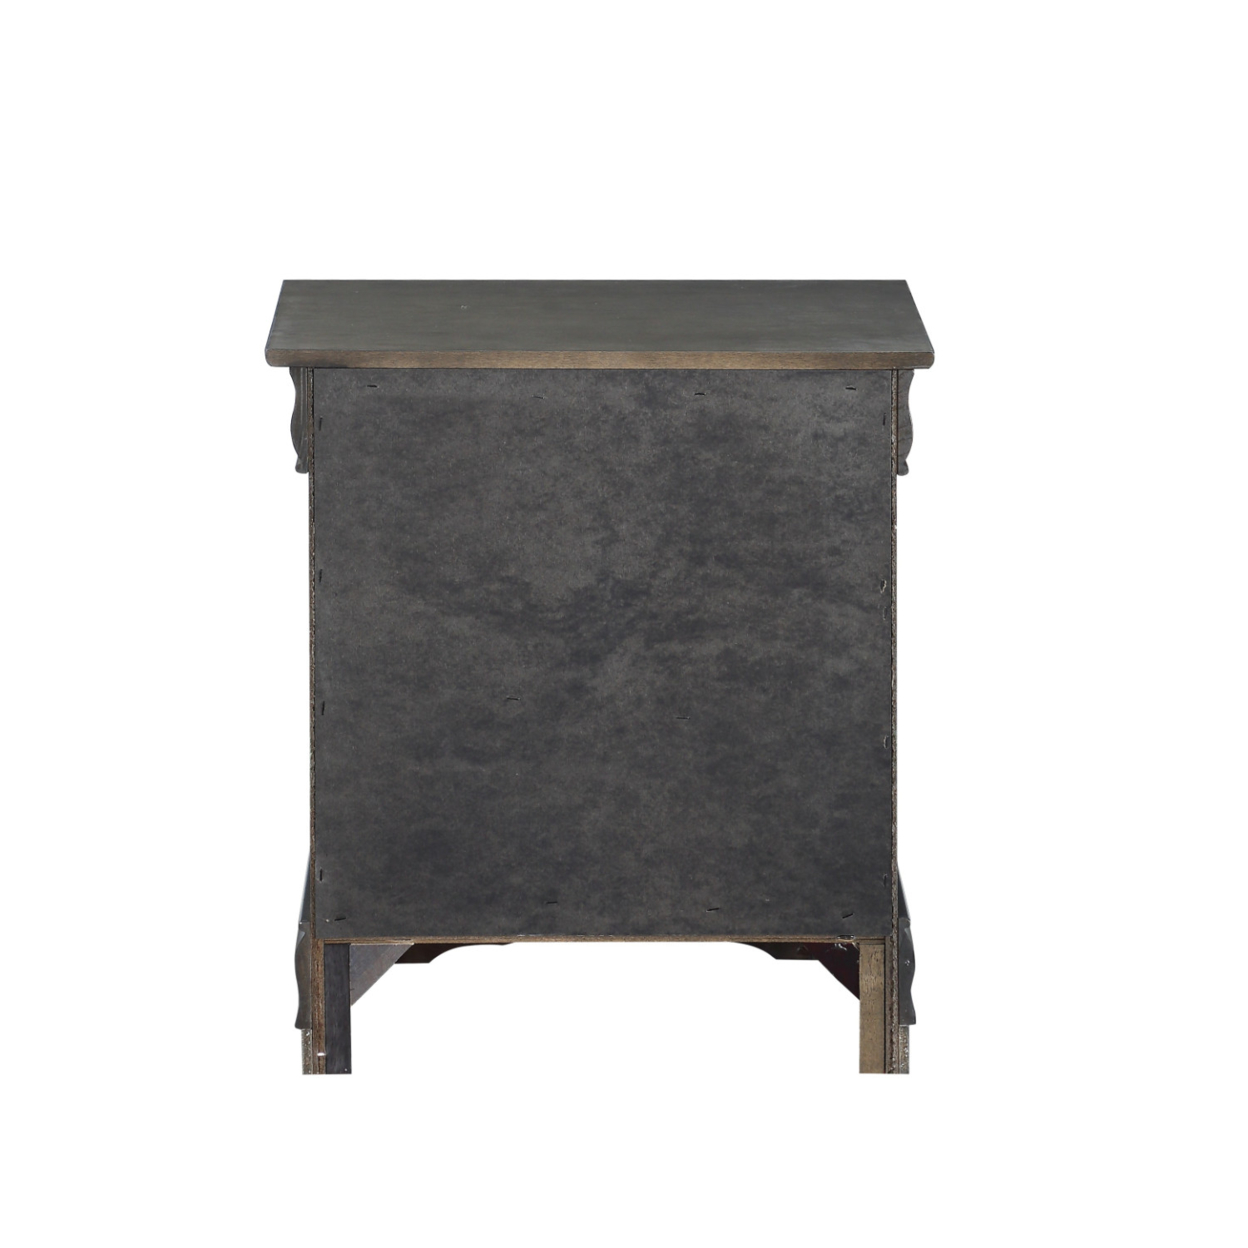 Traditional Style Wooden Nightstand With Two Drawers And Metal Handles, Dark Gray- Saltoro Sherpi